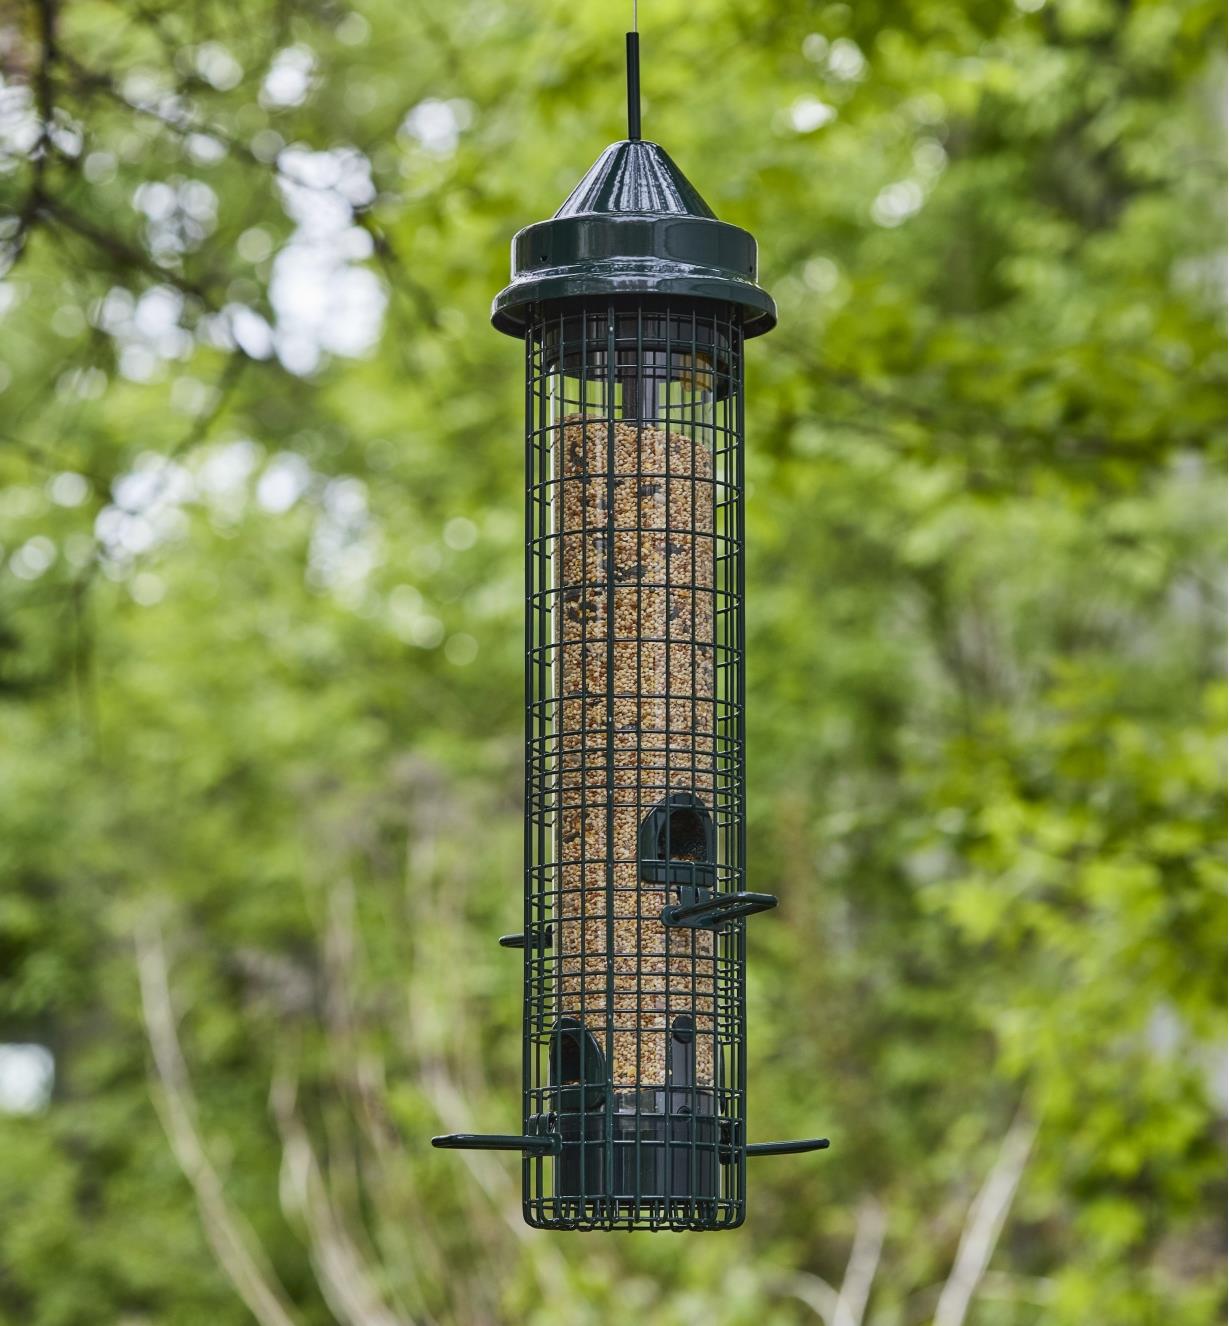 A Squirrel Buster bird feeder filled with seed hangs from a tree